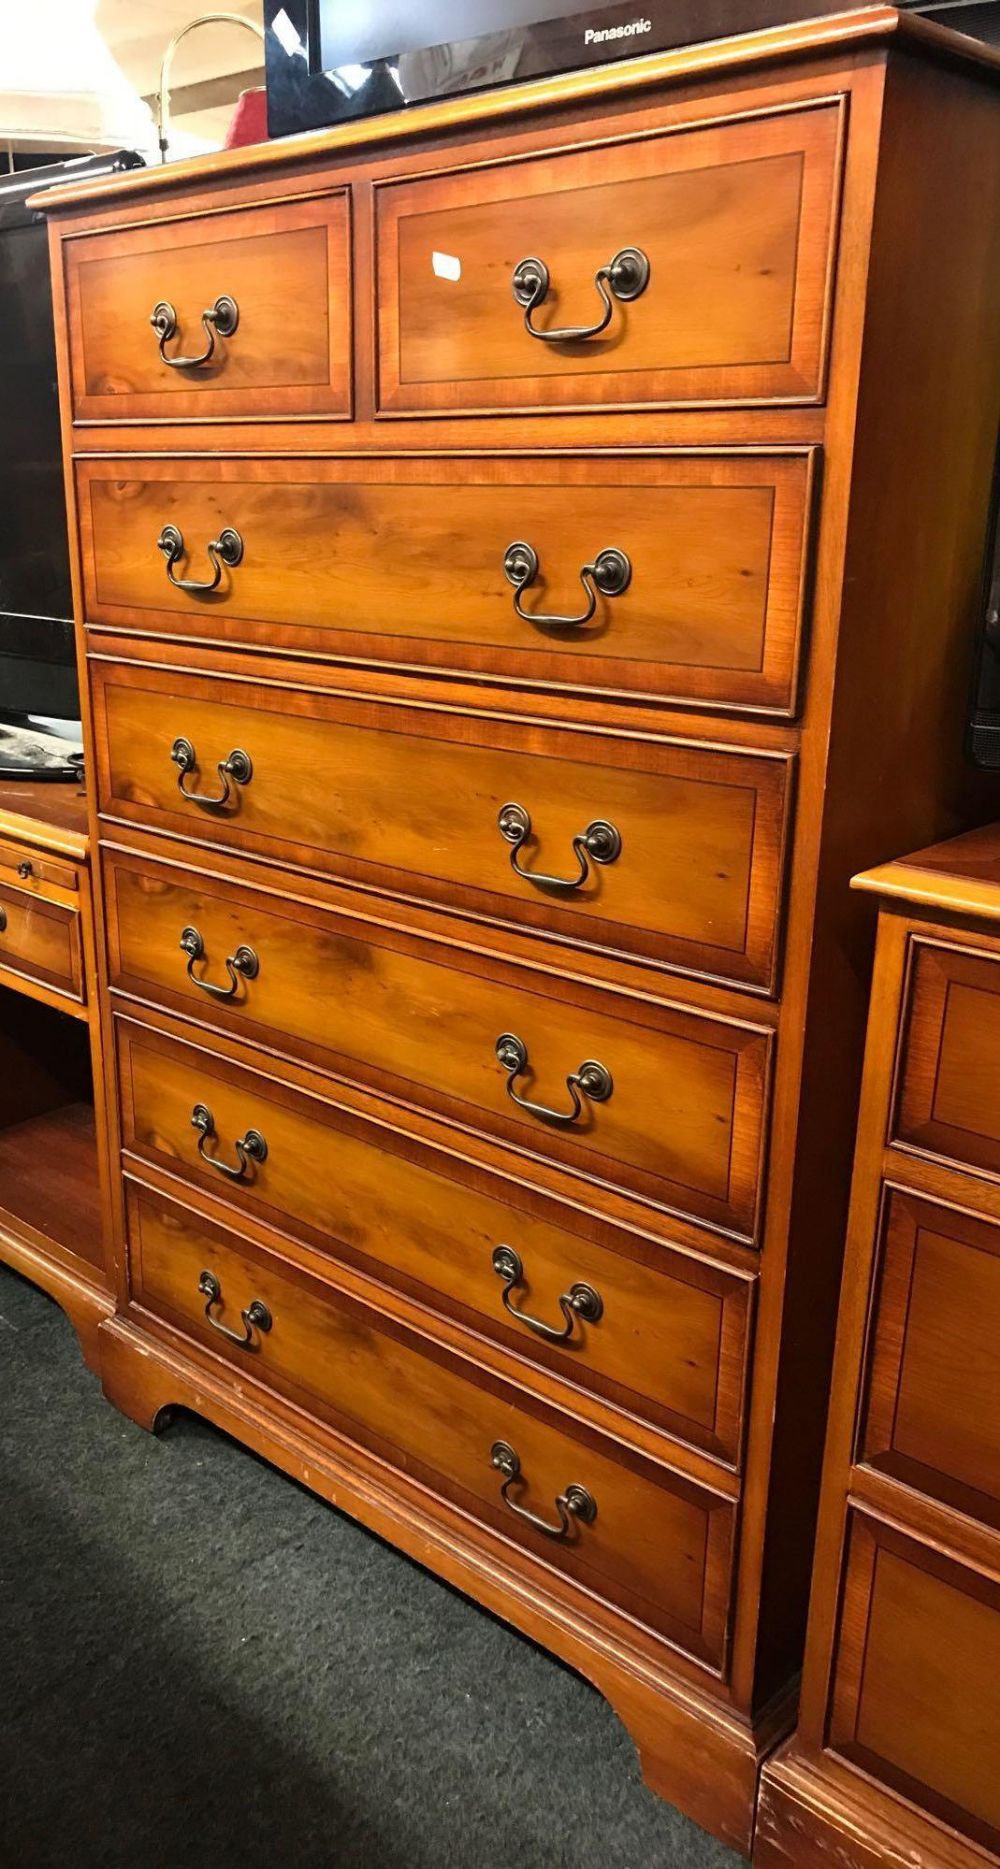 YEW WOOD CHEST OF 7 DRAWERS (2 SHORT, 5 LONG)